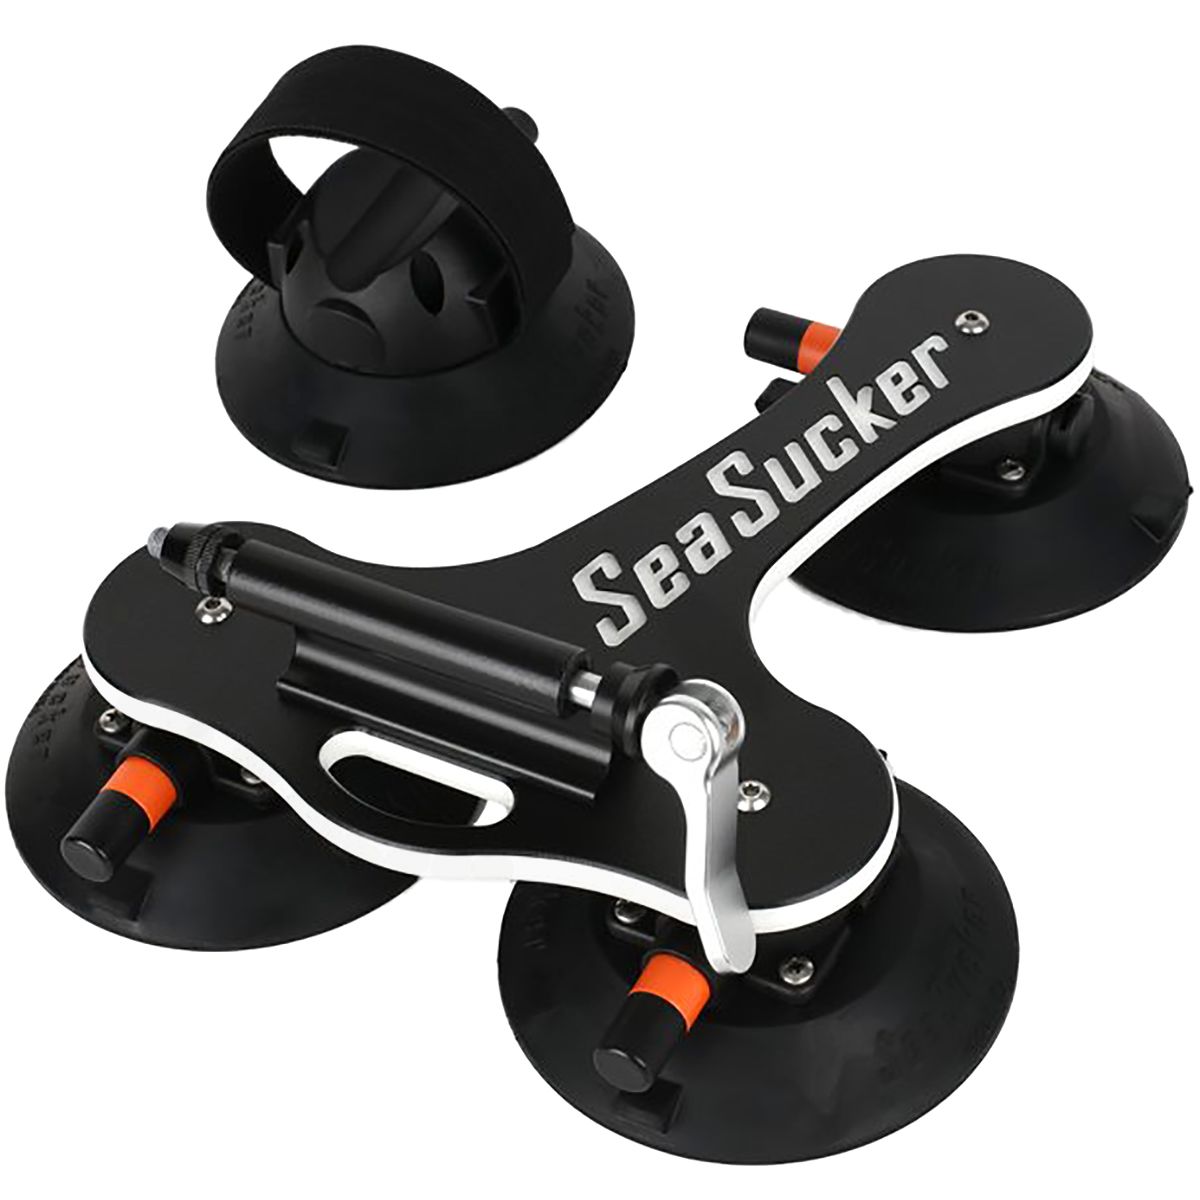 Solo Suction Cup Bike Rack